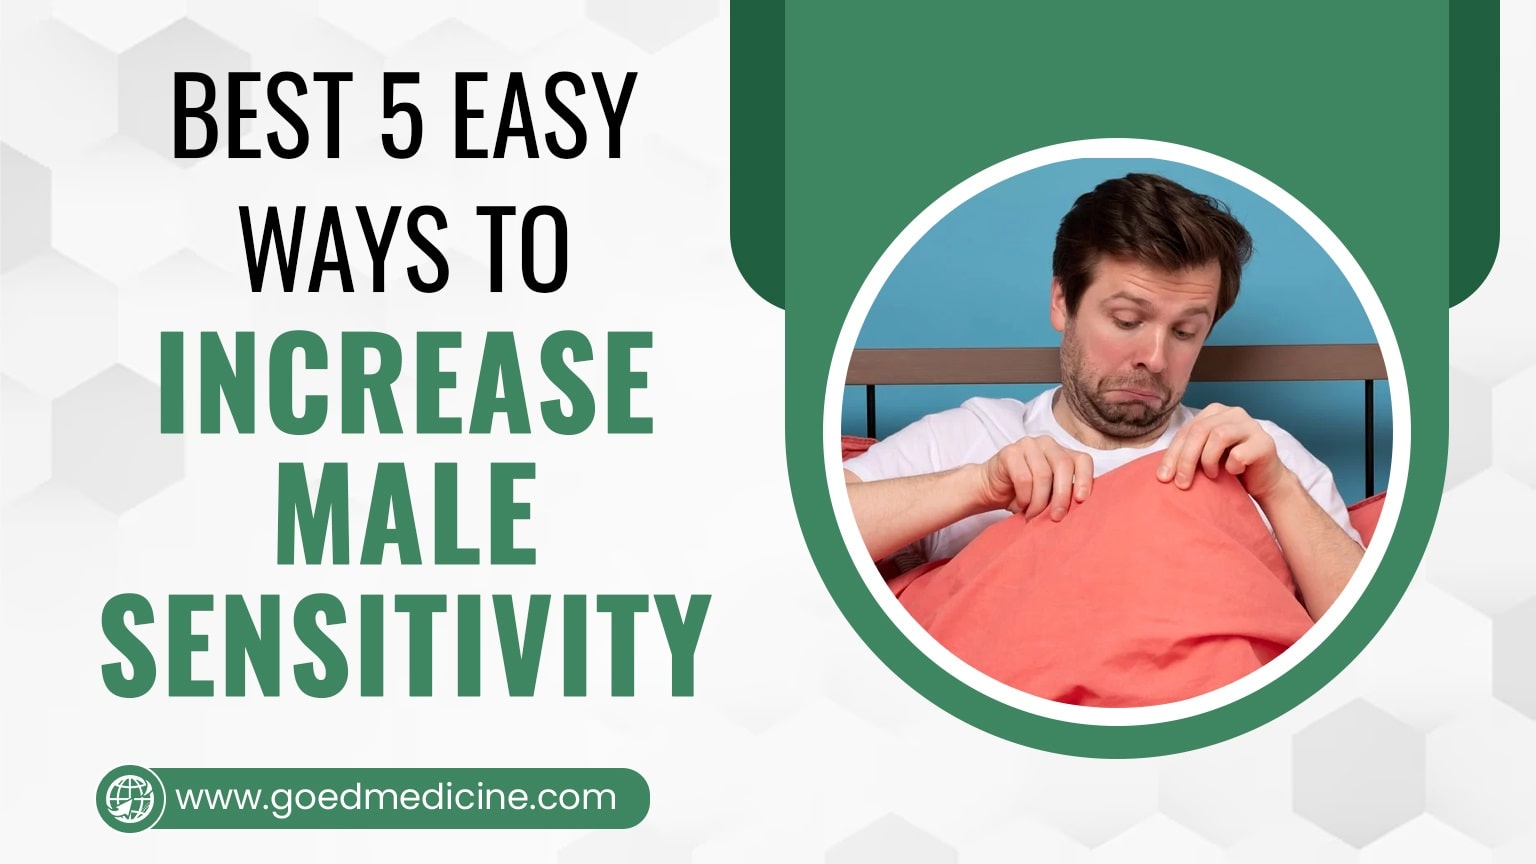 Best 5 Easy Ways to Increase Male Sensitivity